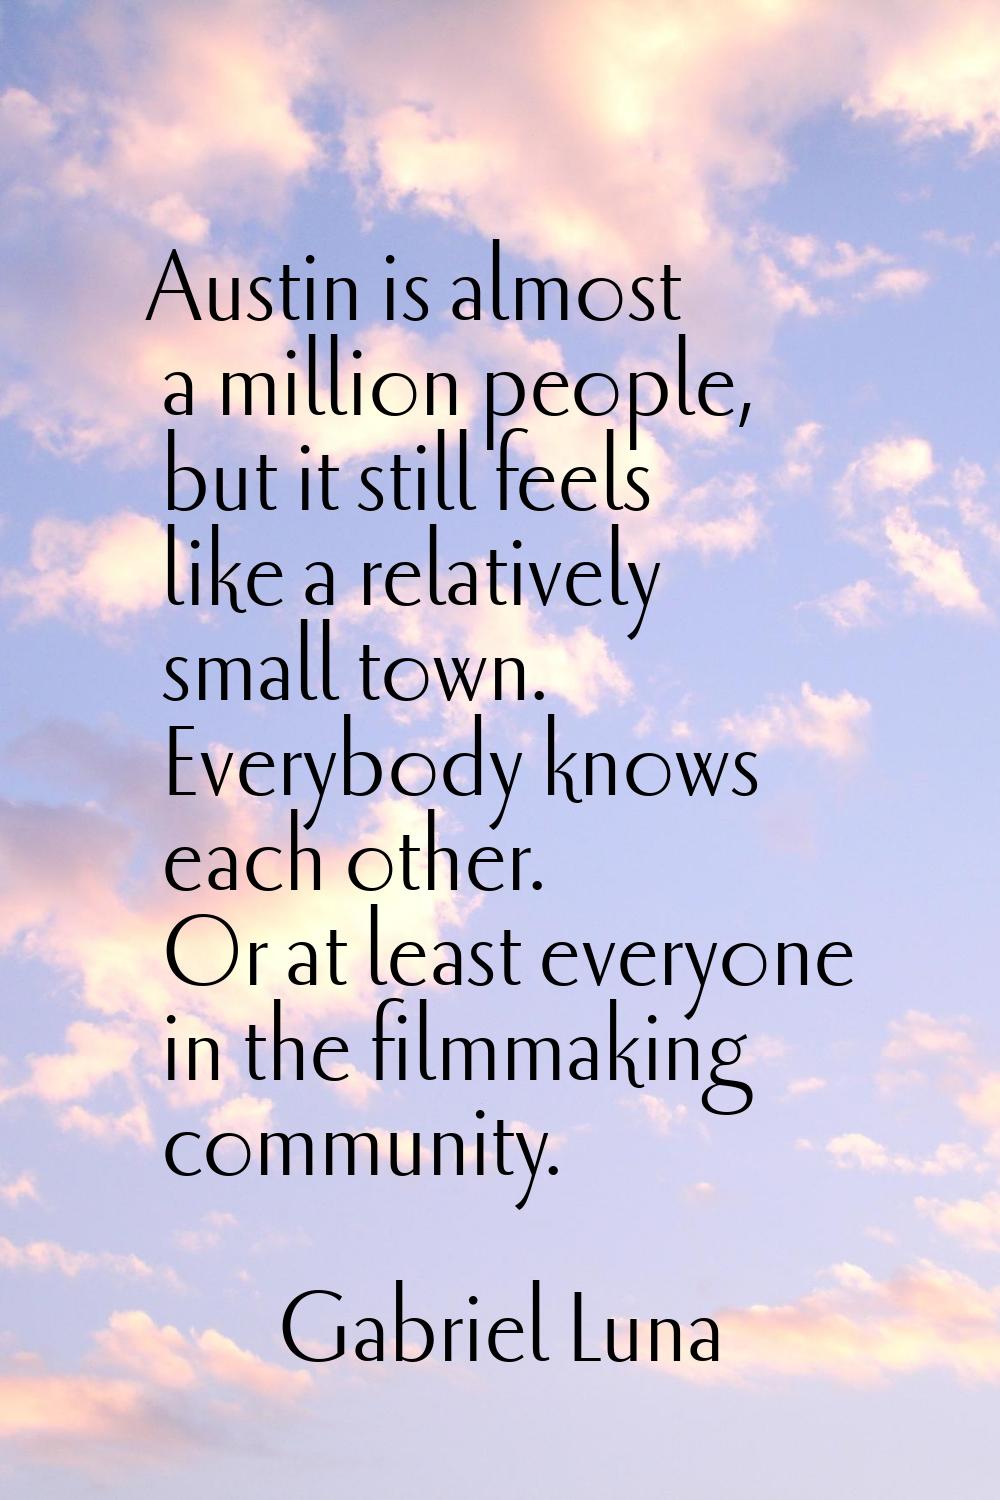 Austin is almost a million people, but it still feels like a relatively small town. Everybody knows